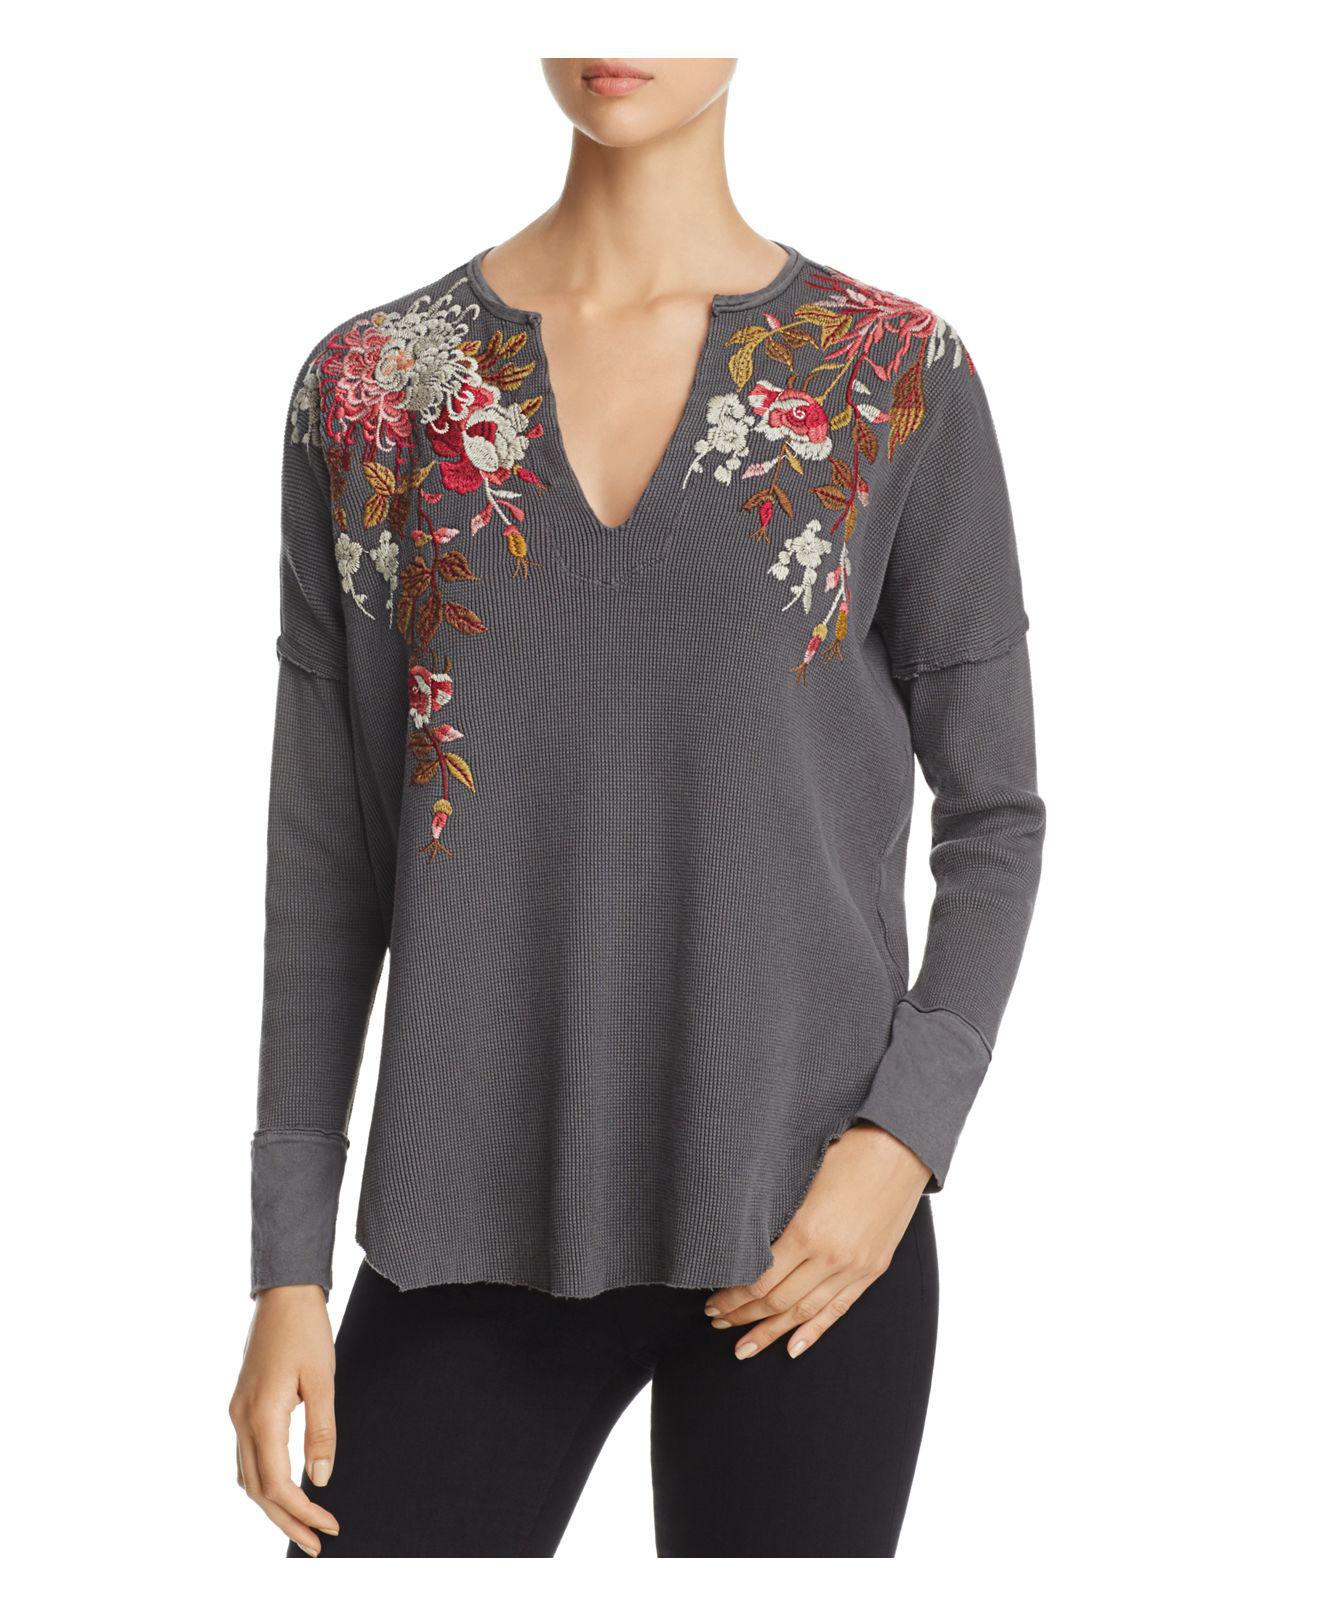 Lyst - Johnny Was Embroidered Thermal Top in Gray